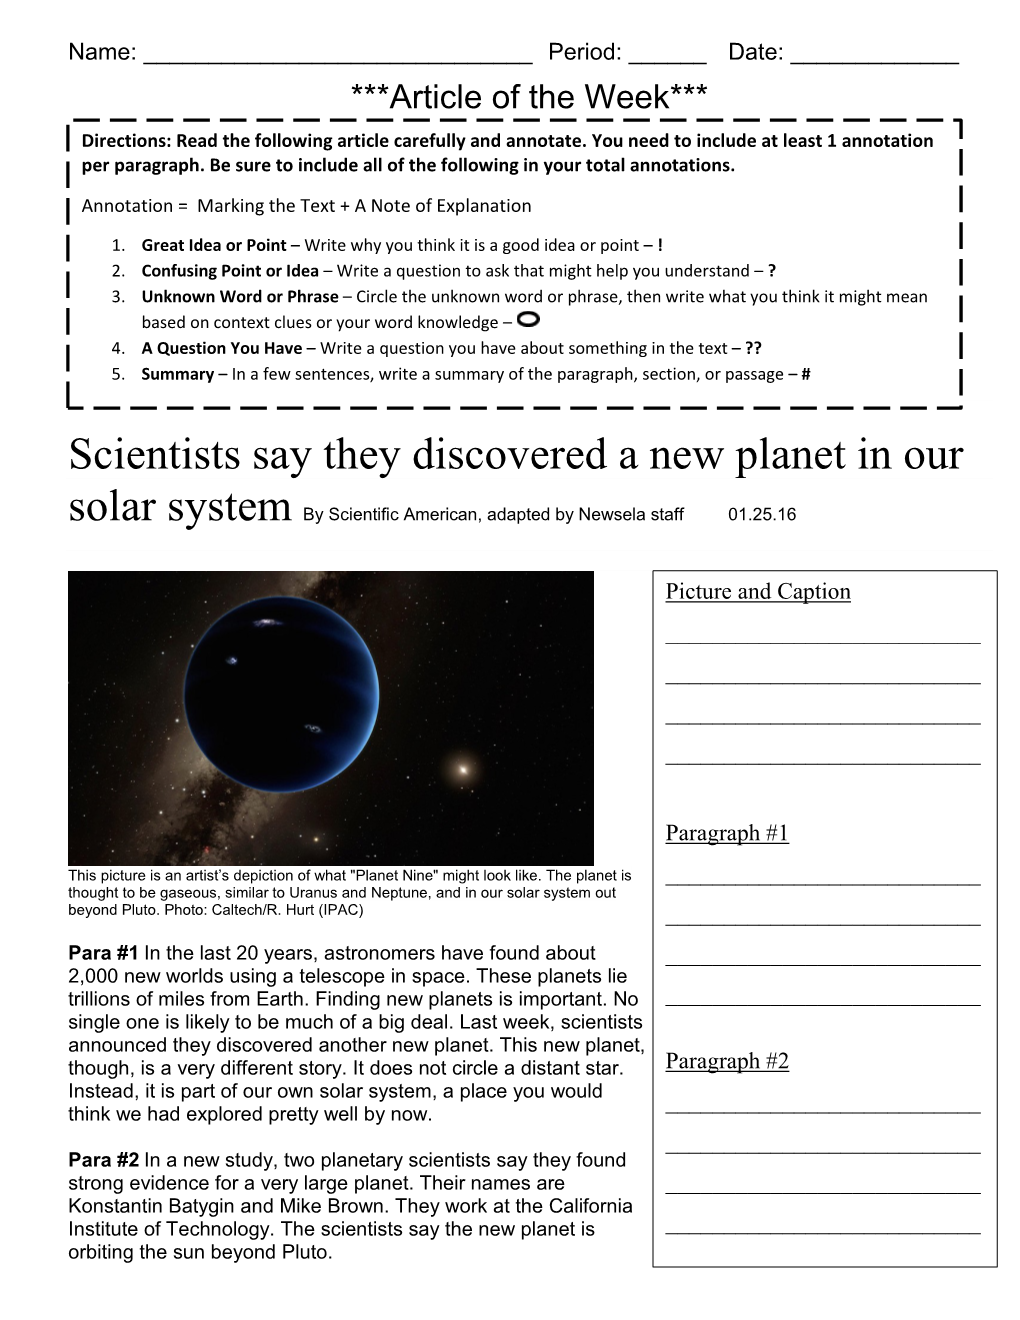 Scientists Say They Discovered a New Planet in Our Solar System by Scientific American, Adapted by Newsela Staff 01.25.16